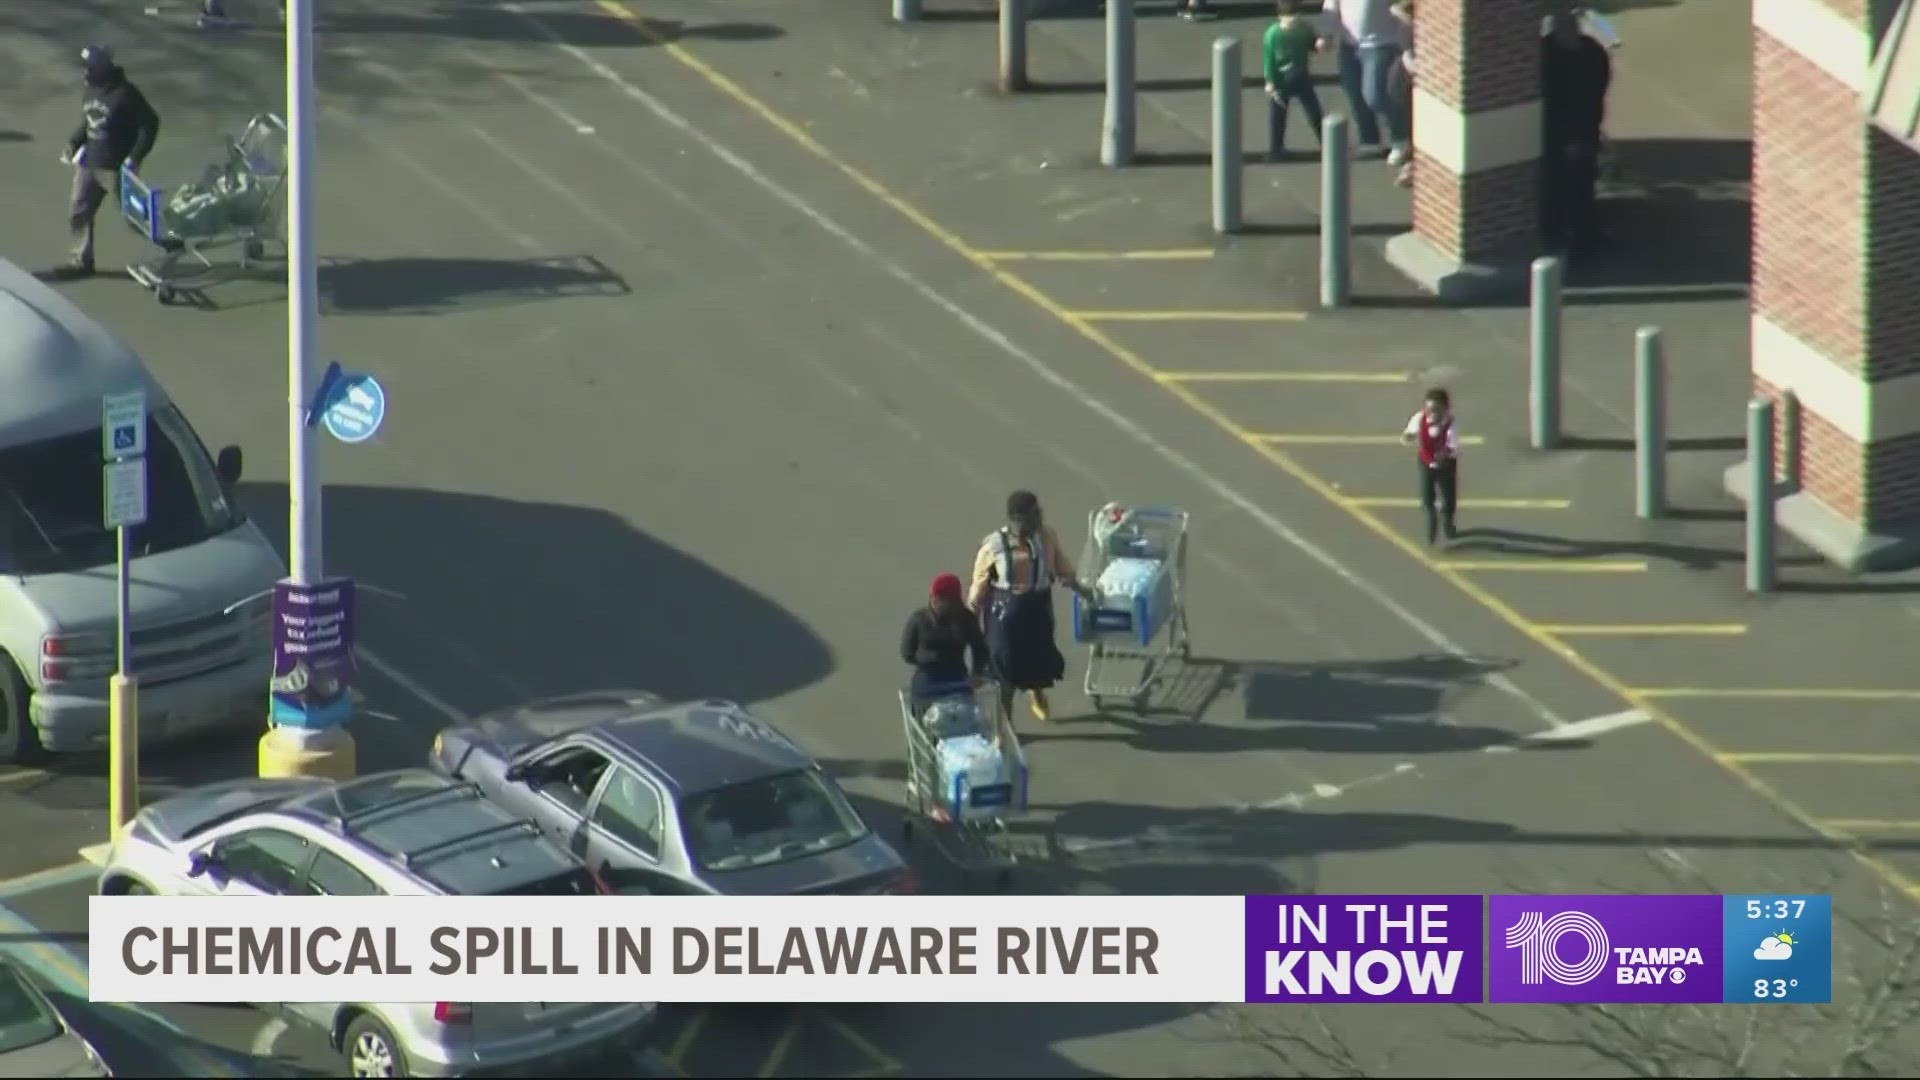 Philadelphia officials say thousands of gallons of a non-toxic water-based latex finishing solution spilled into the Delaware River in neighboring Bucks County.